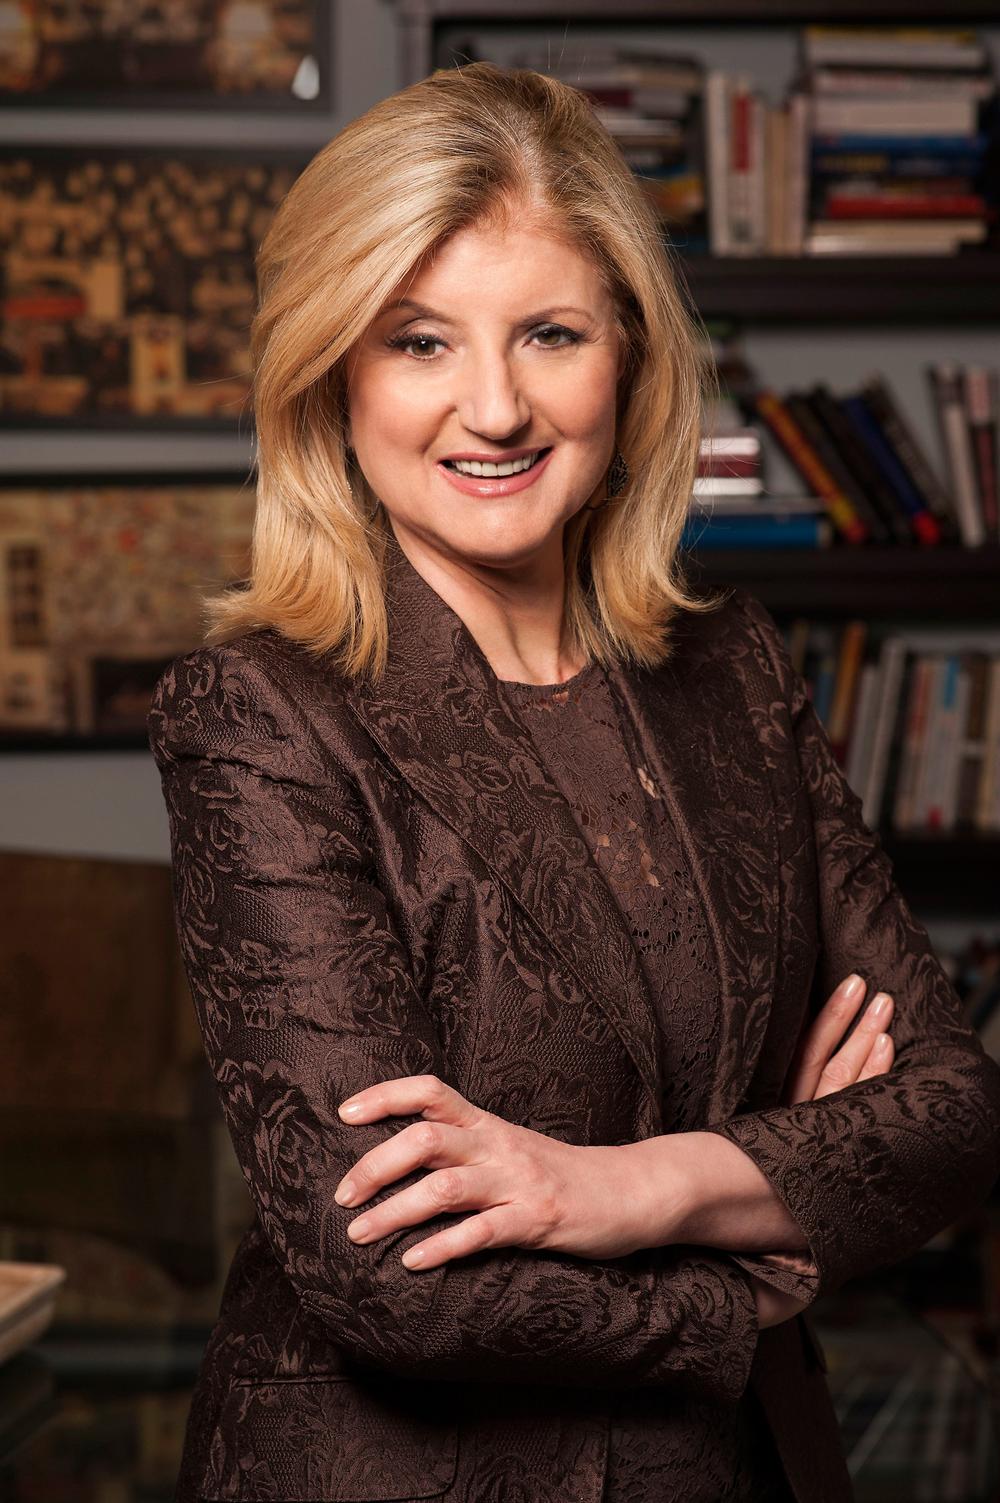 The Huffington Post launched in 2005; Huffington remains president and editor-in-chief